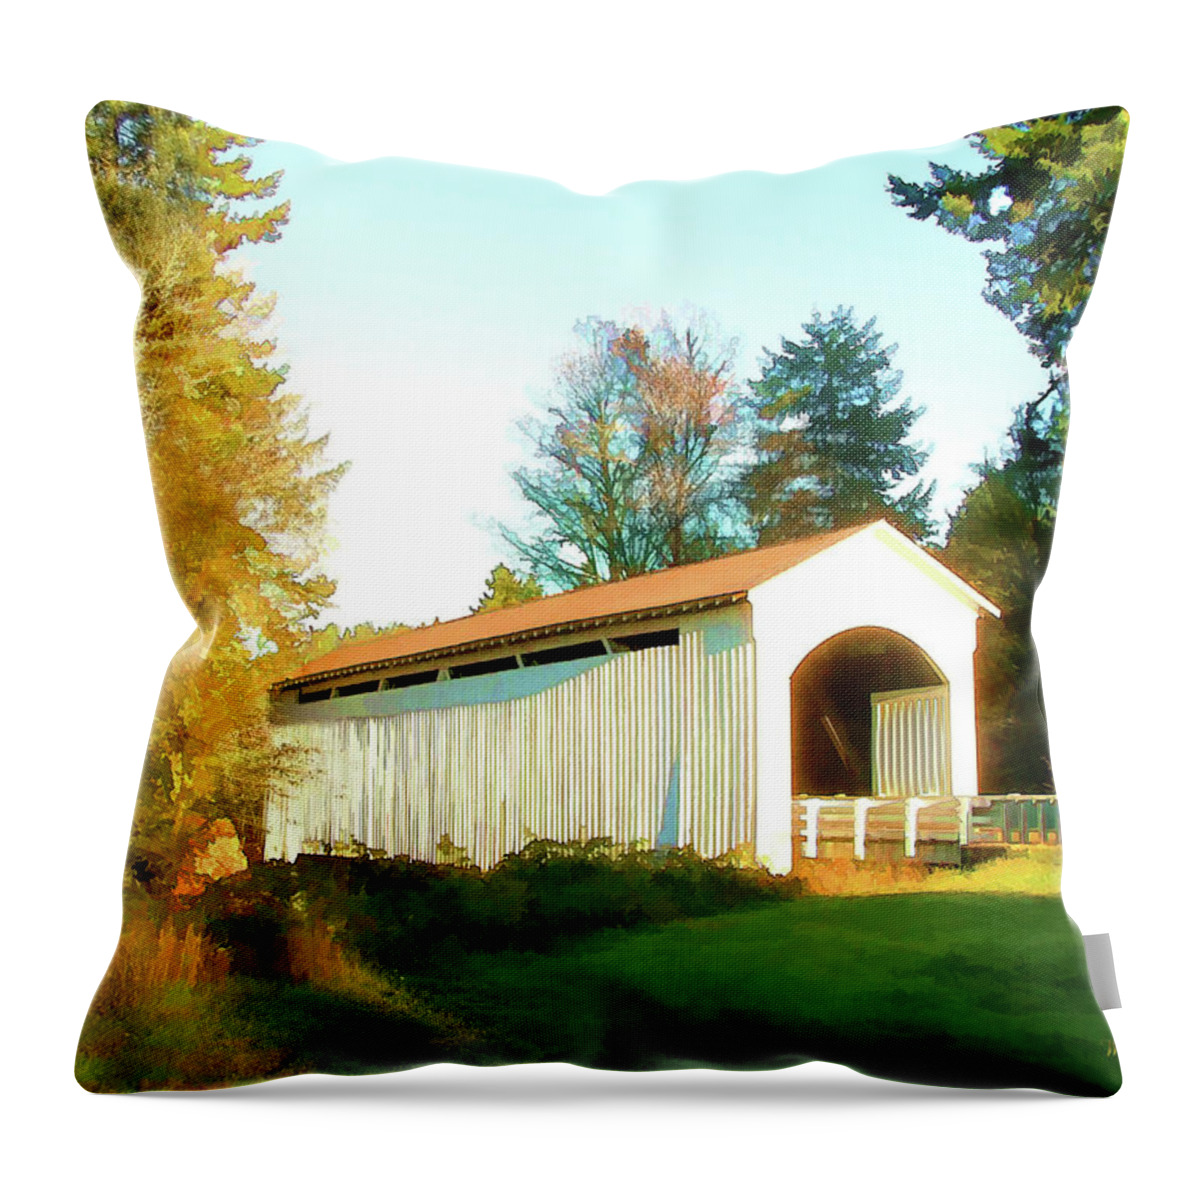 Covered Bridges Throw Pillow featuring the photograph Mosby Creek Covered Bridge by Wendy McKennon